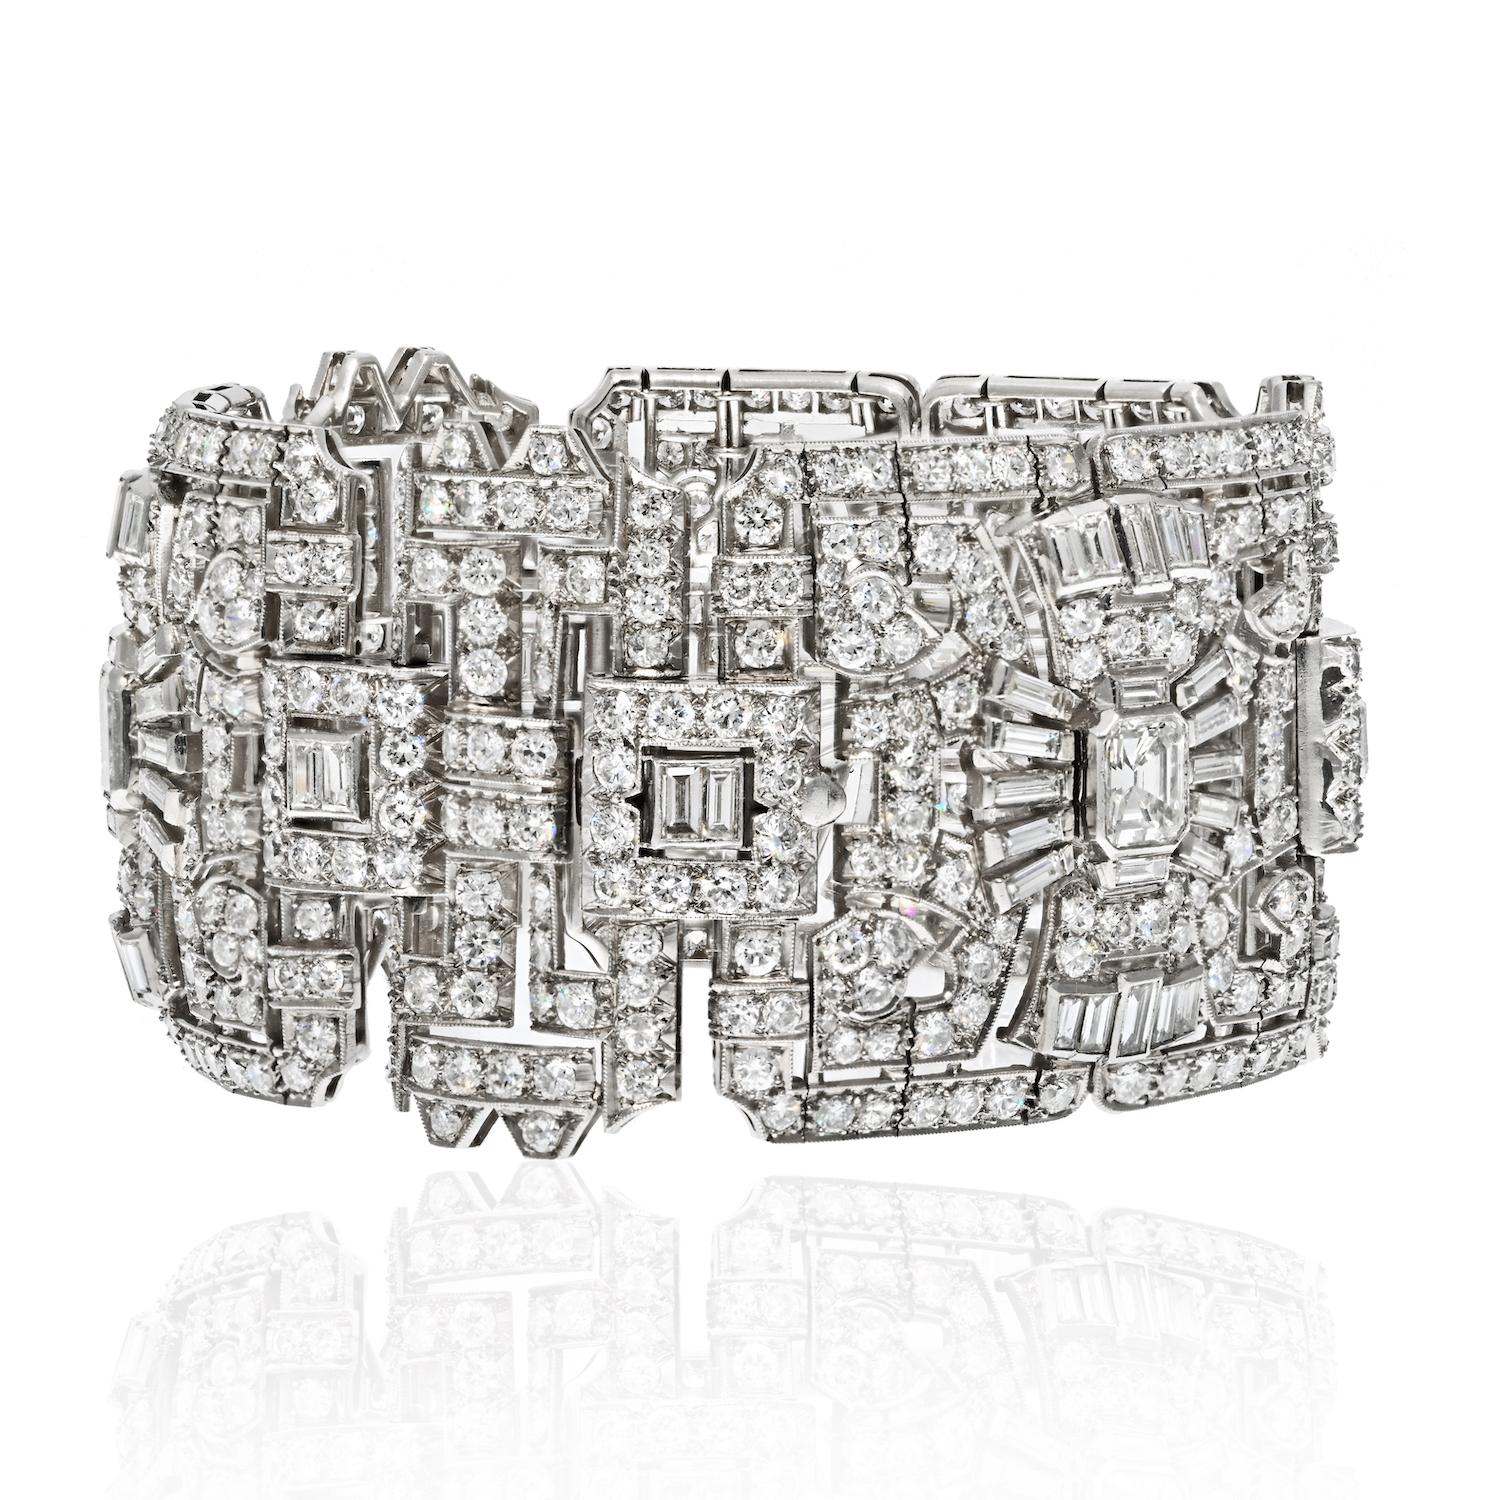 Old cut diamonds, baguette cut diamonds, straight cut diamonds: total carat weight 47.00cttw. 

Art Deco jewelry is special for many reasons. First, it has a unique and timeless beauty that stands out from traditional jewelry designs. 

Secondly, it